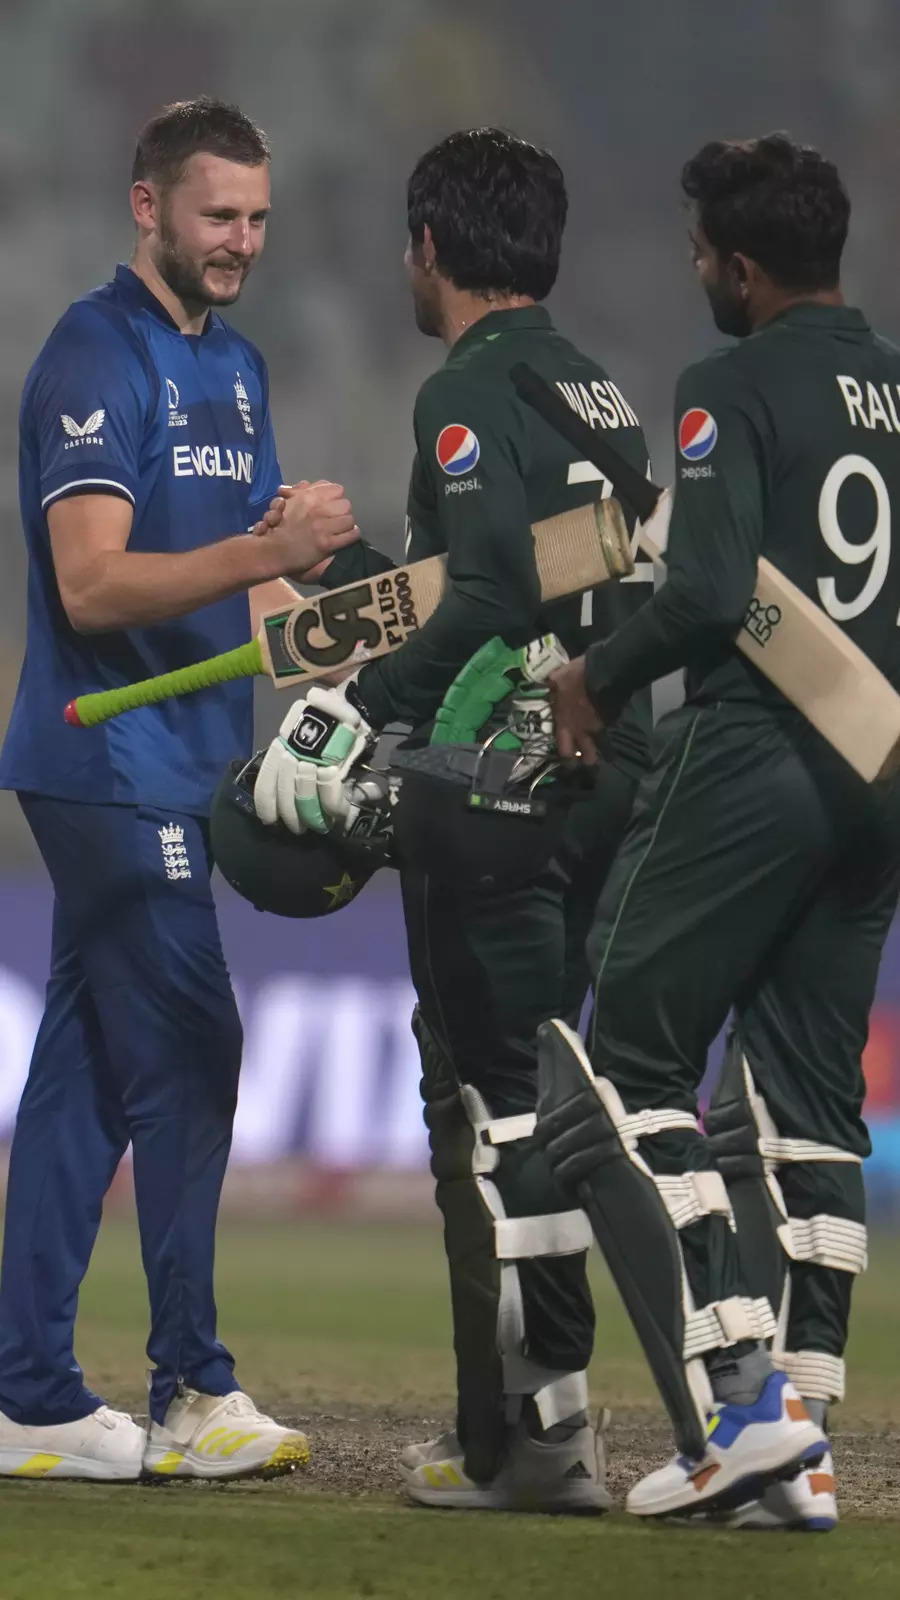 England send Pakistan crashing out of World Cup with thumping win